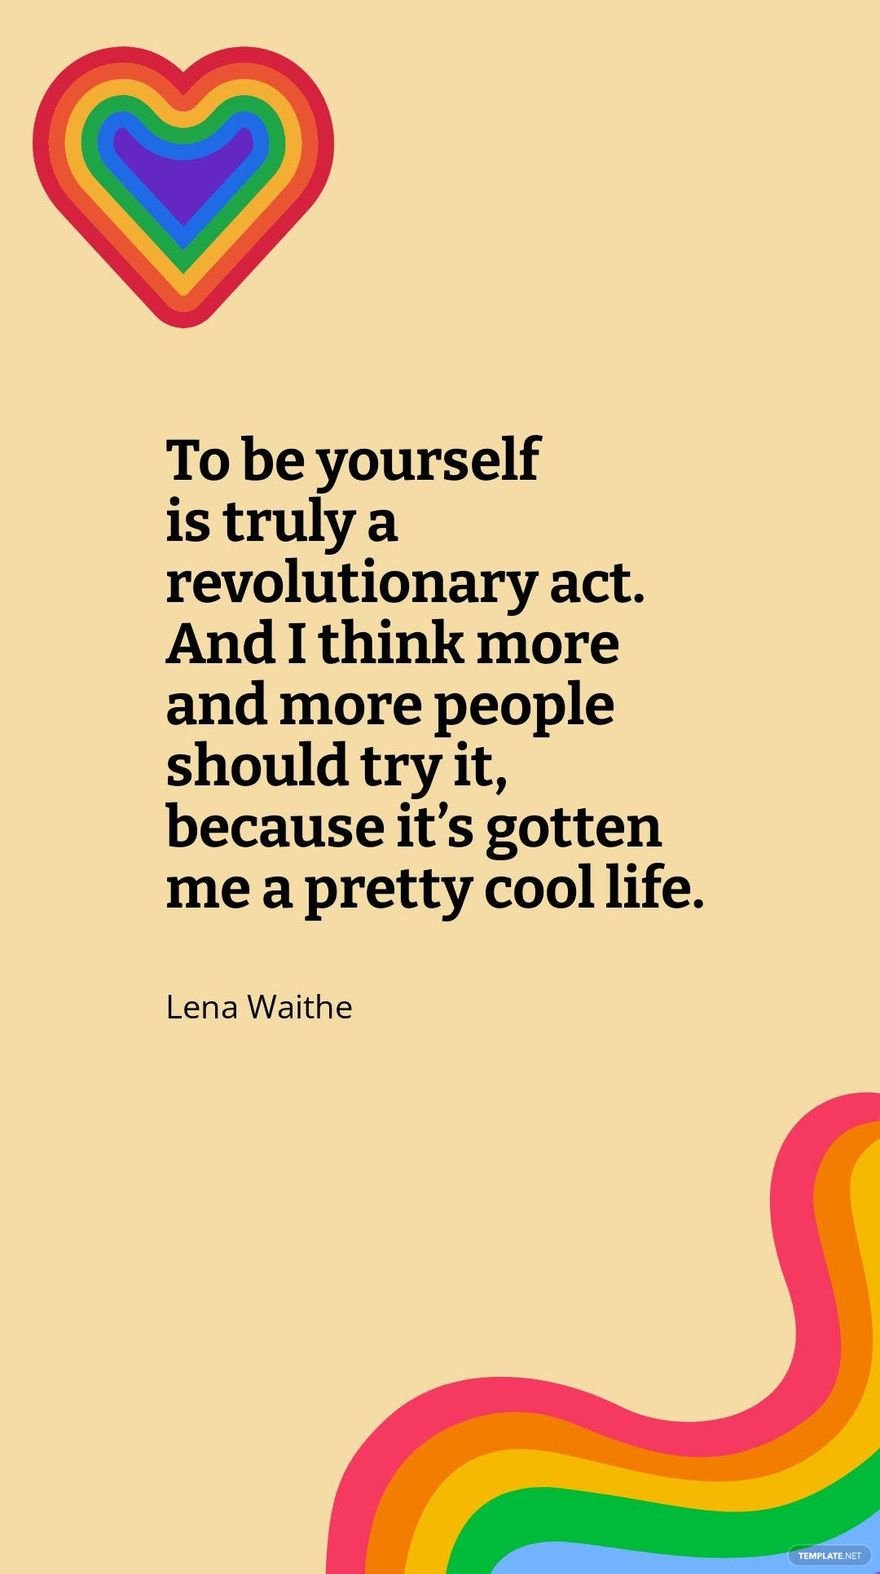 Lena Waithe - To be yourself is truly a revolutionary act. And I think more and more people should try it, because it’s gotten me a pretty cool life.  Template